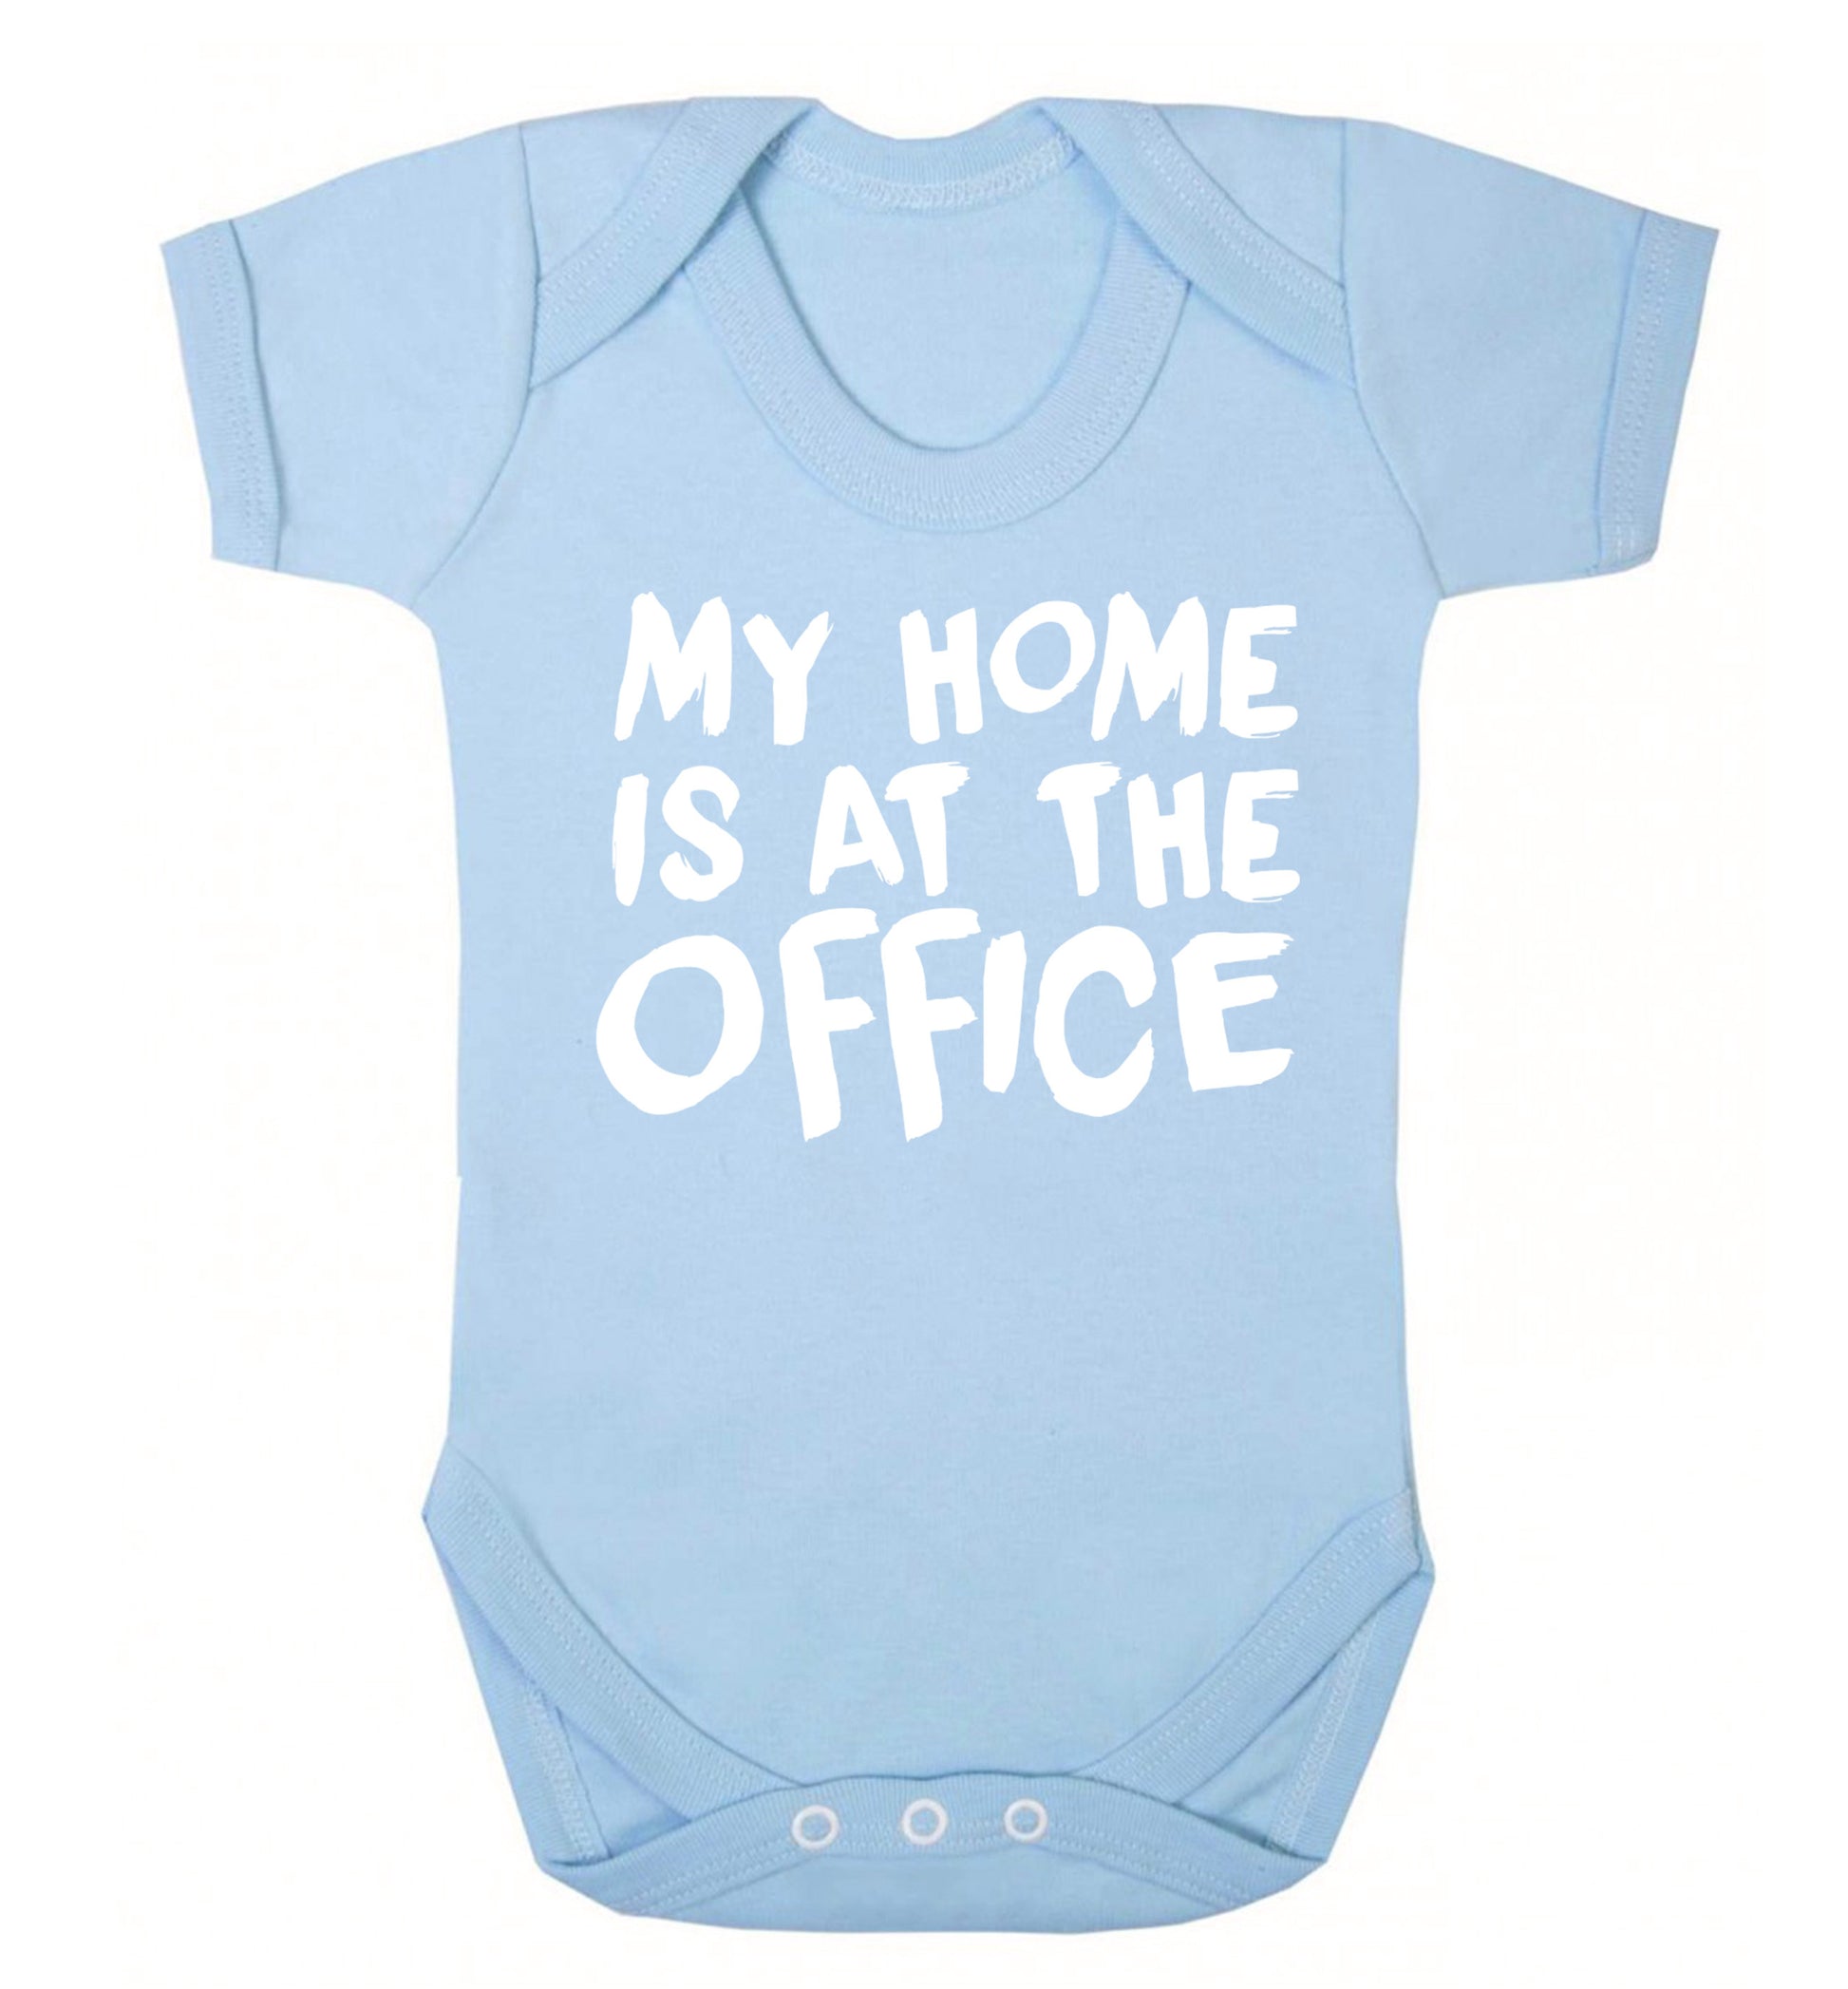 My home is at the office Baby Vest pale blue 18-24 months